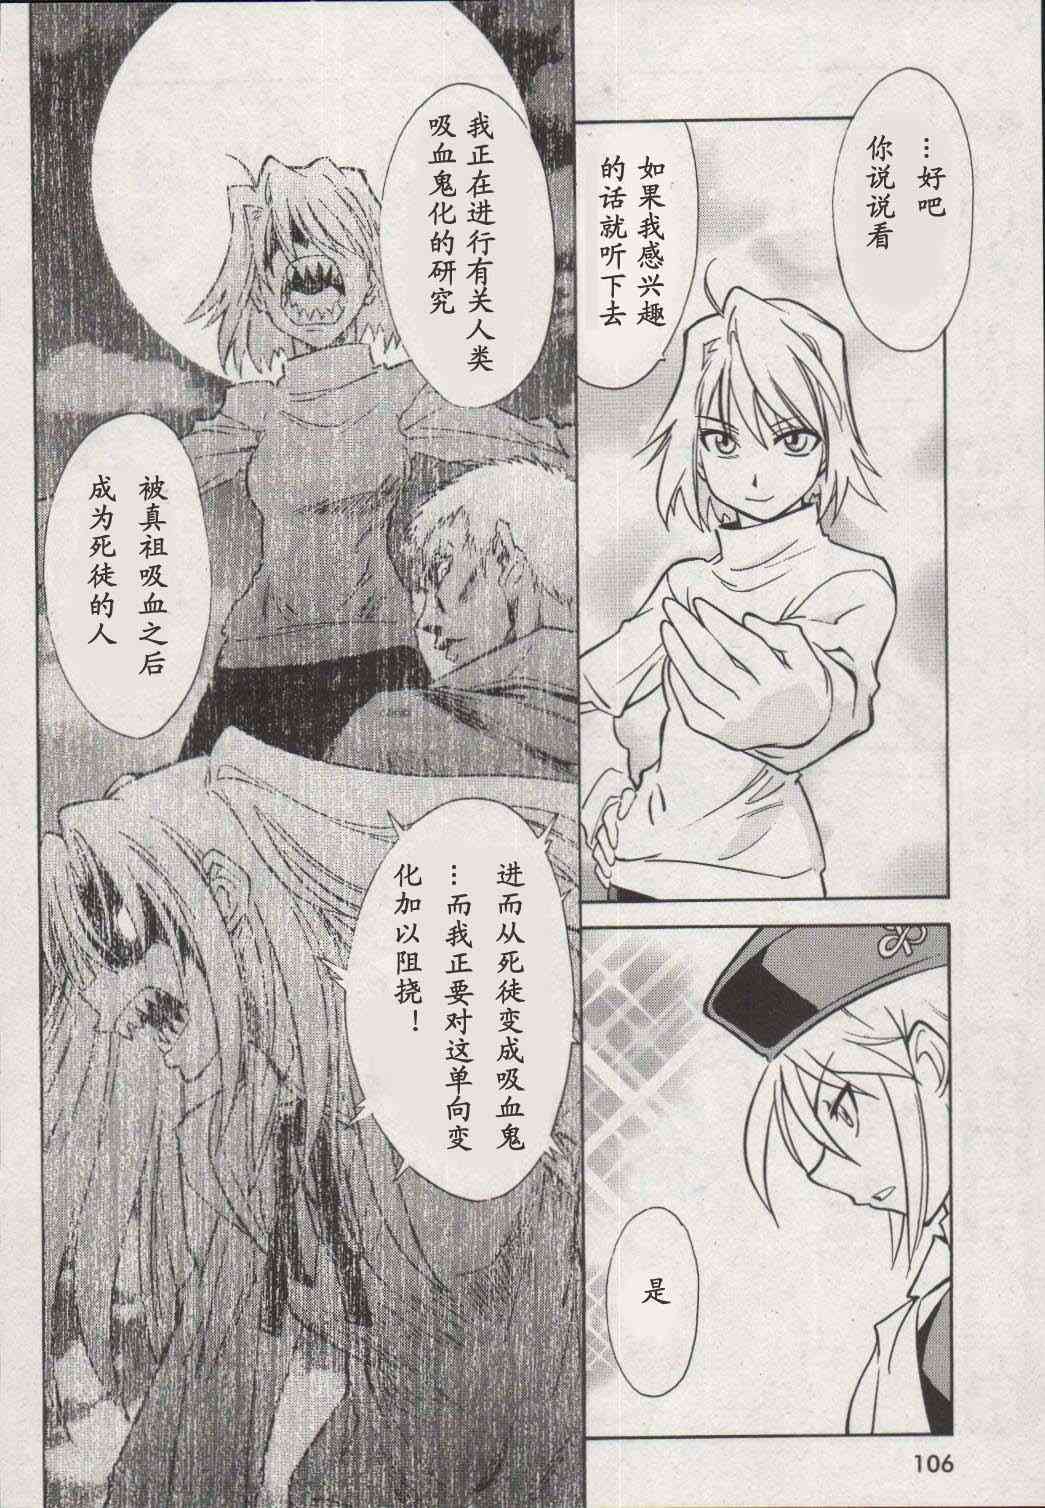 《Melty Blood》漫画 ch_08